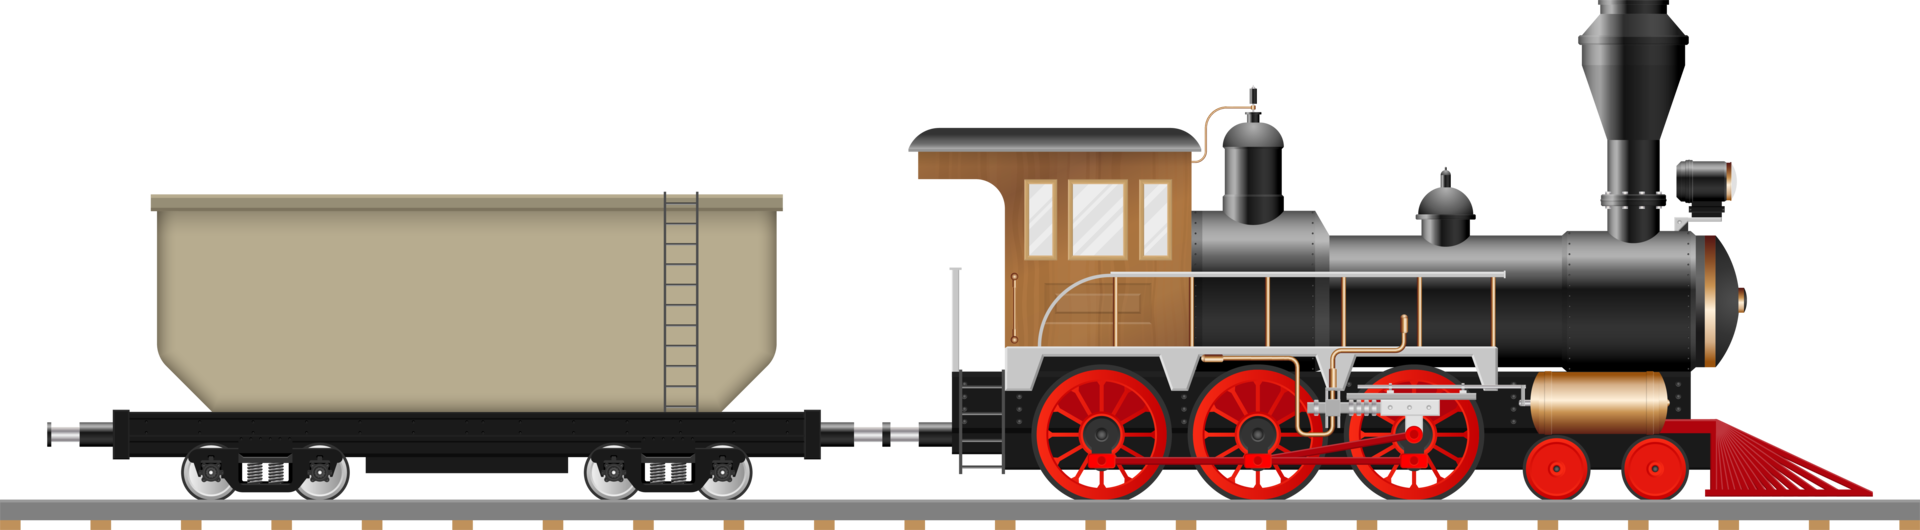 Vintage steam locomotive and wagon png